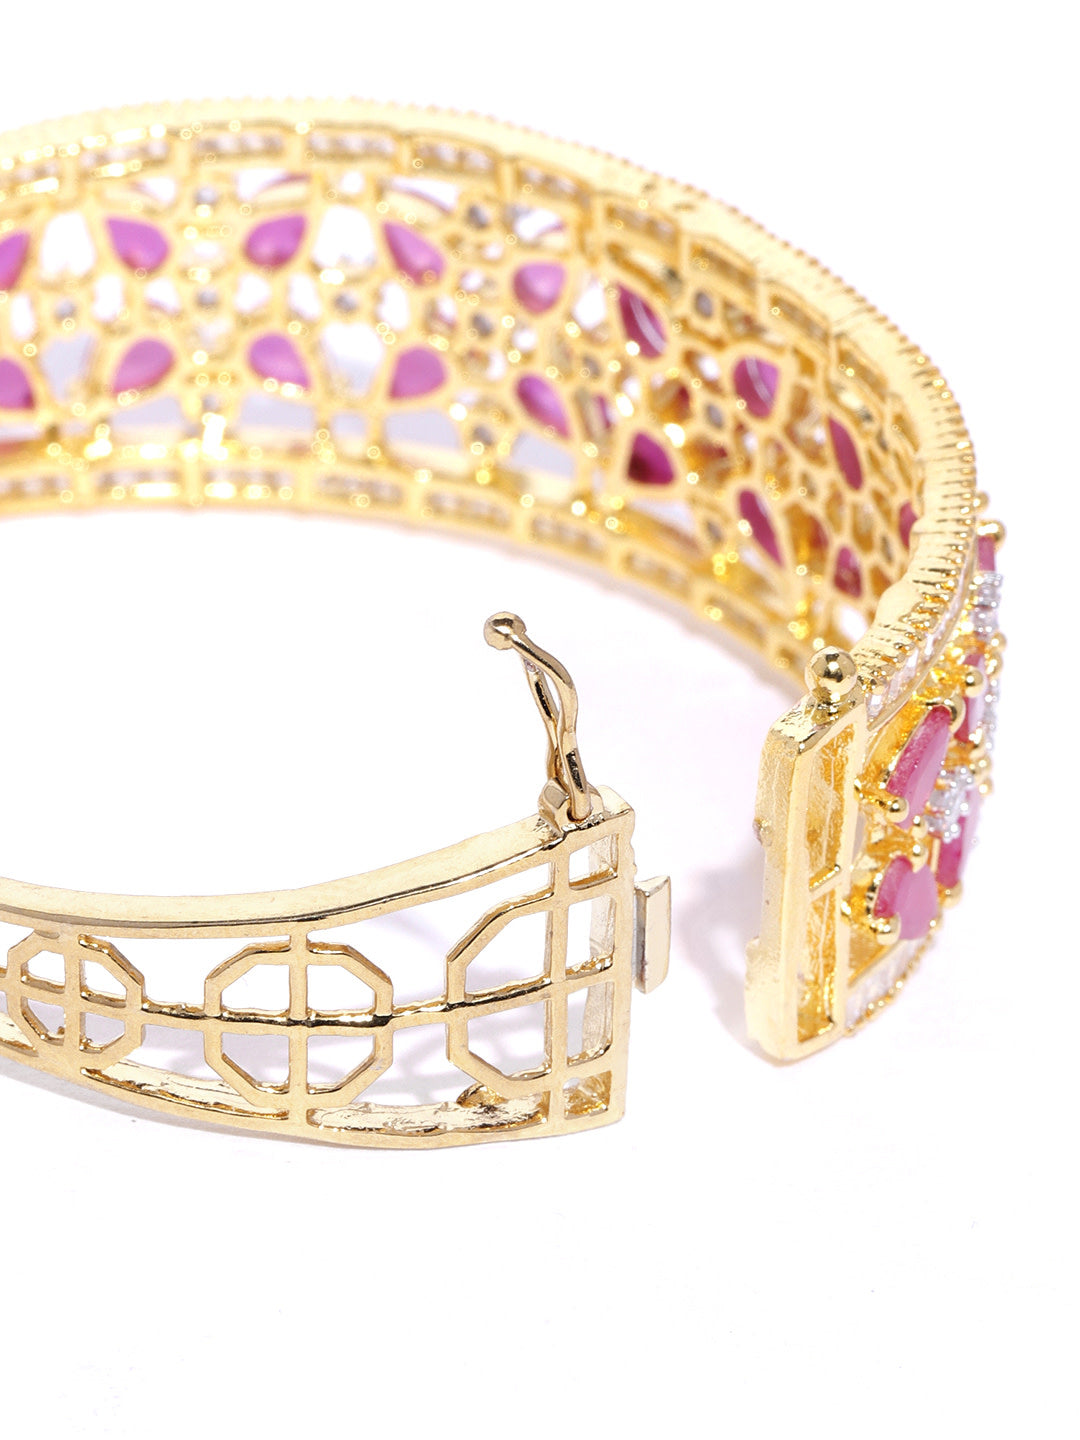 Gold-Plated American Diamond and Ruby Studded, Floral Patterned Kada Bracelet in Pink Color